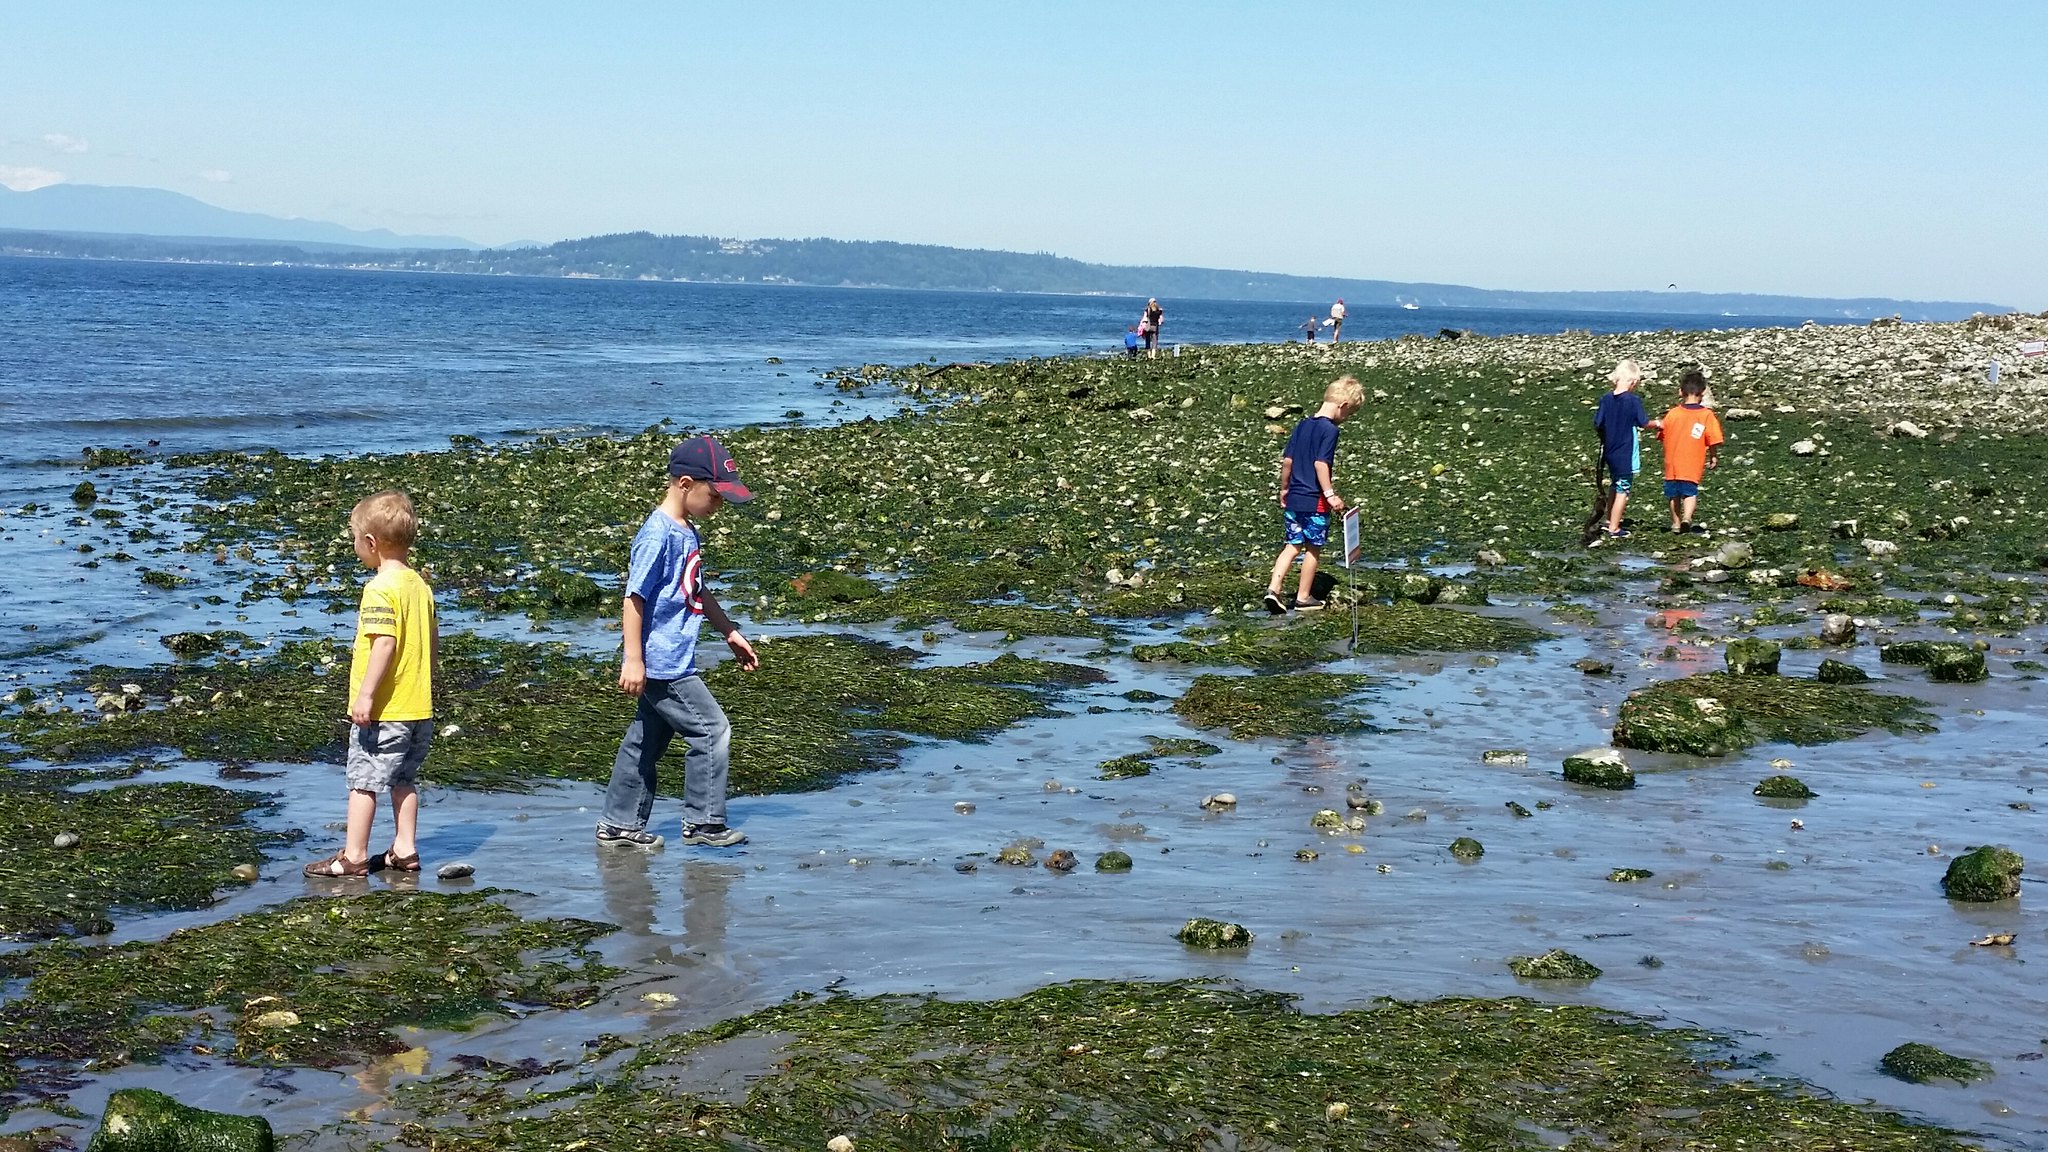 Richmond Beach Saltwater Park is a peaceful spot to take your family and enjoy the Puget Sound.